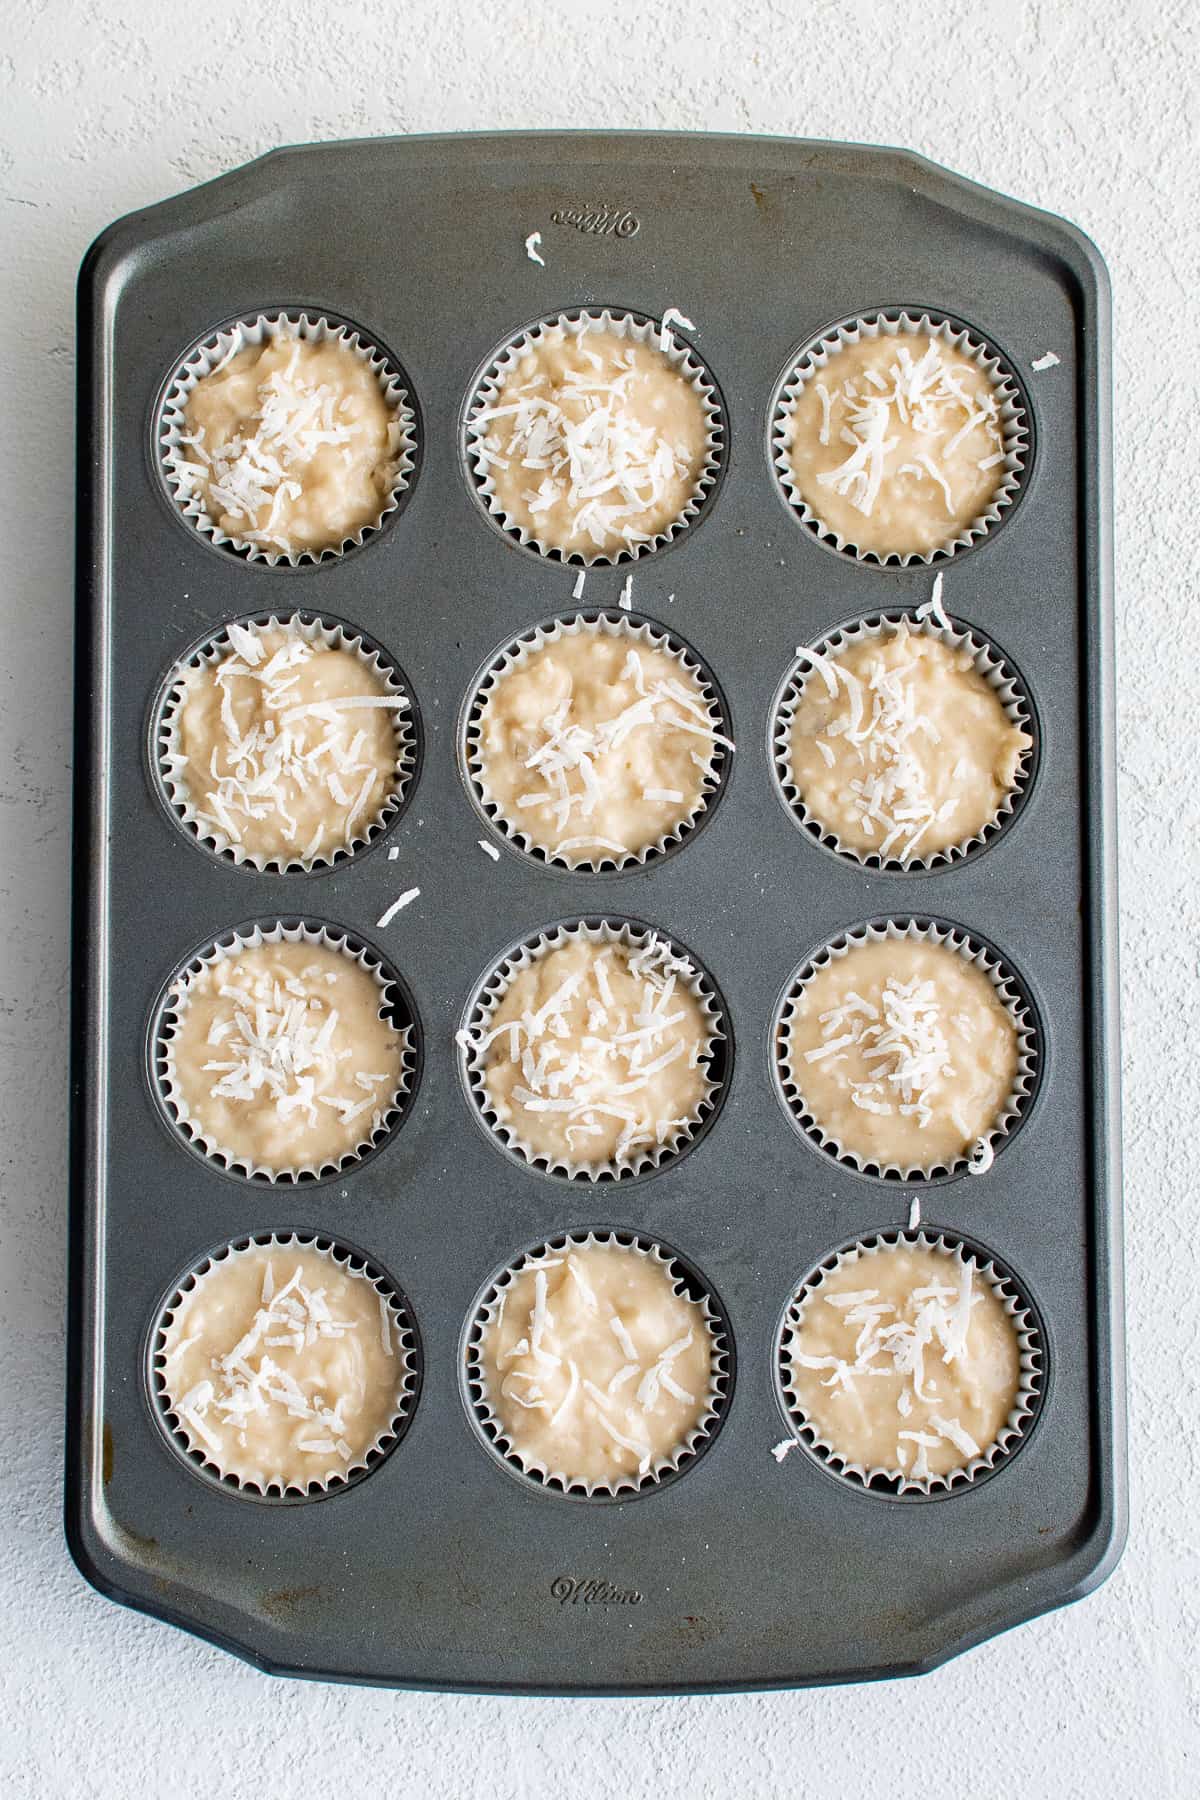 Unbaked muffins in a pan.